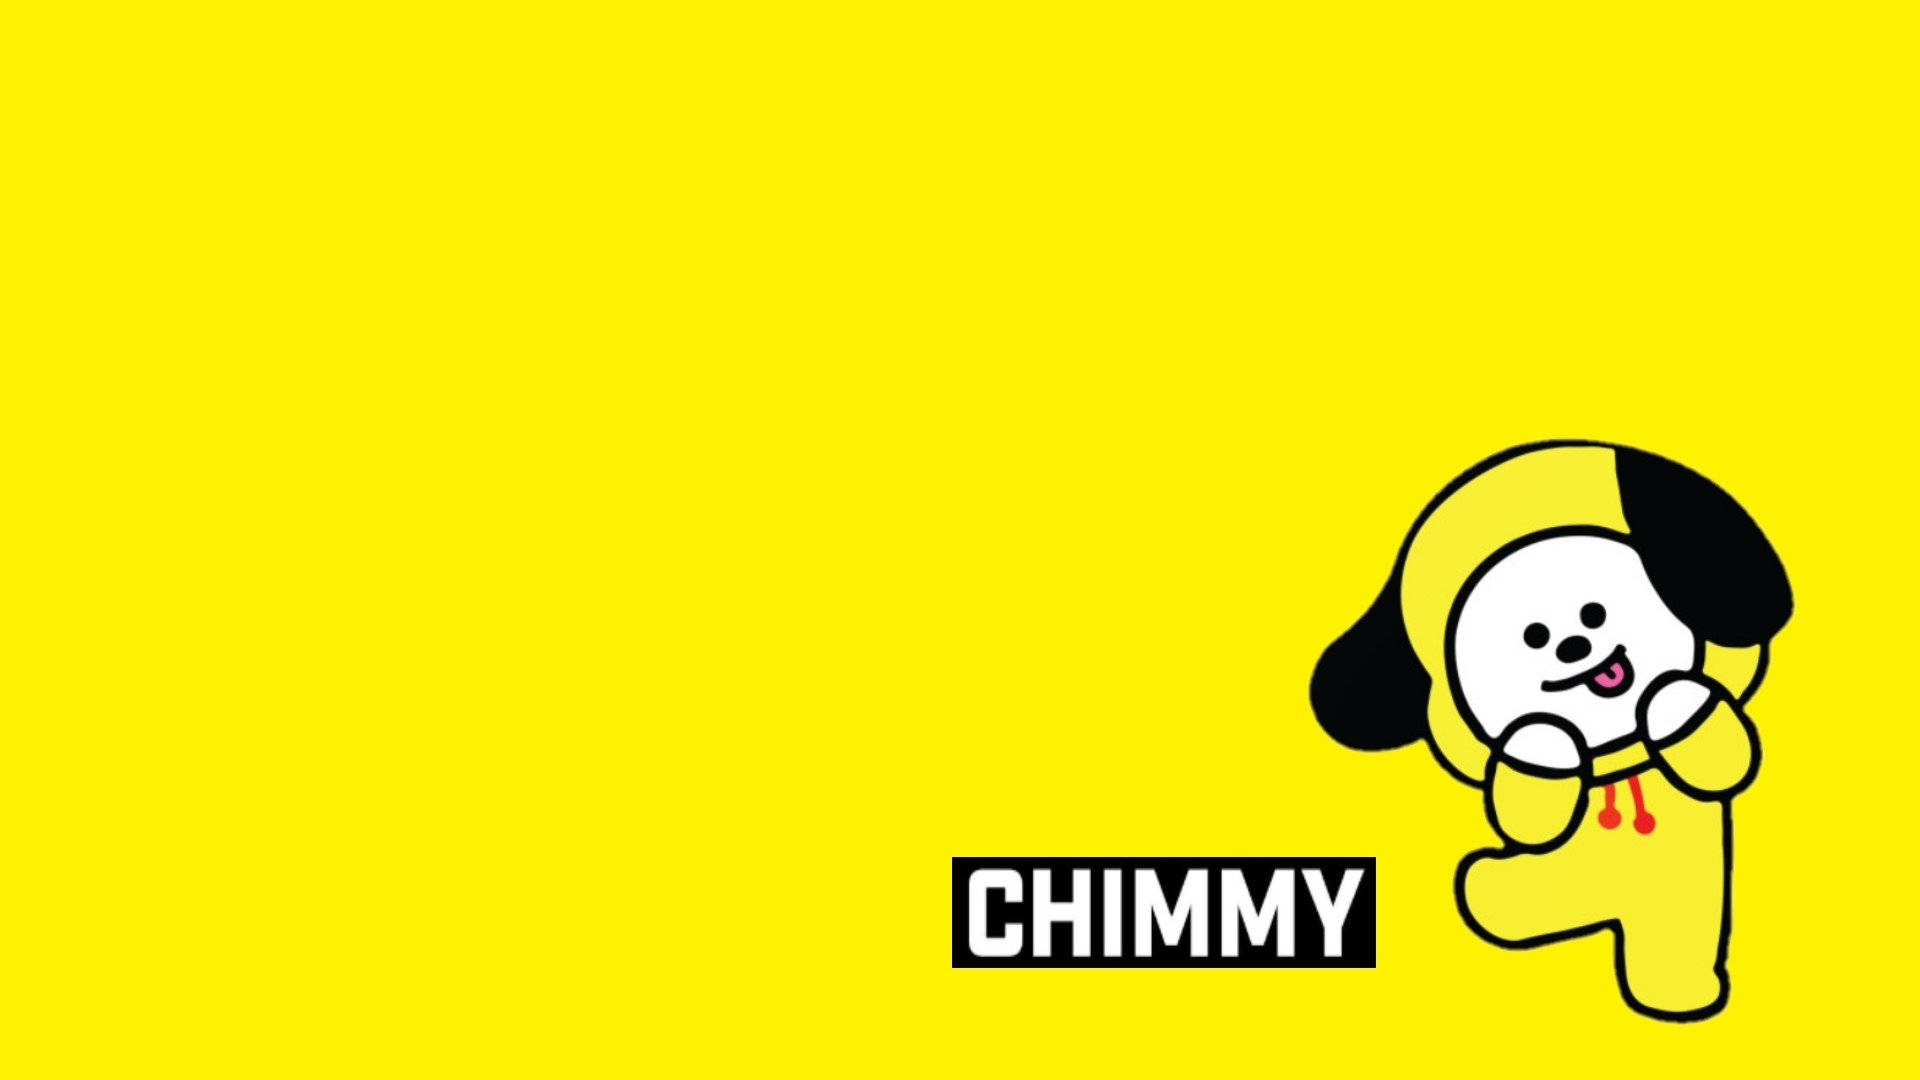 Chimmy Bt21 Character In Yellow